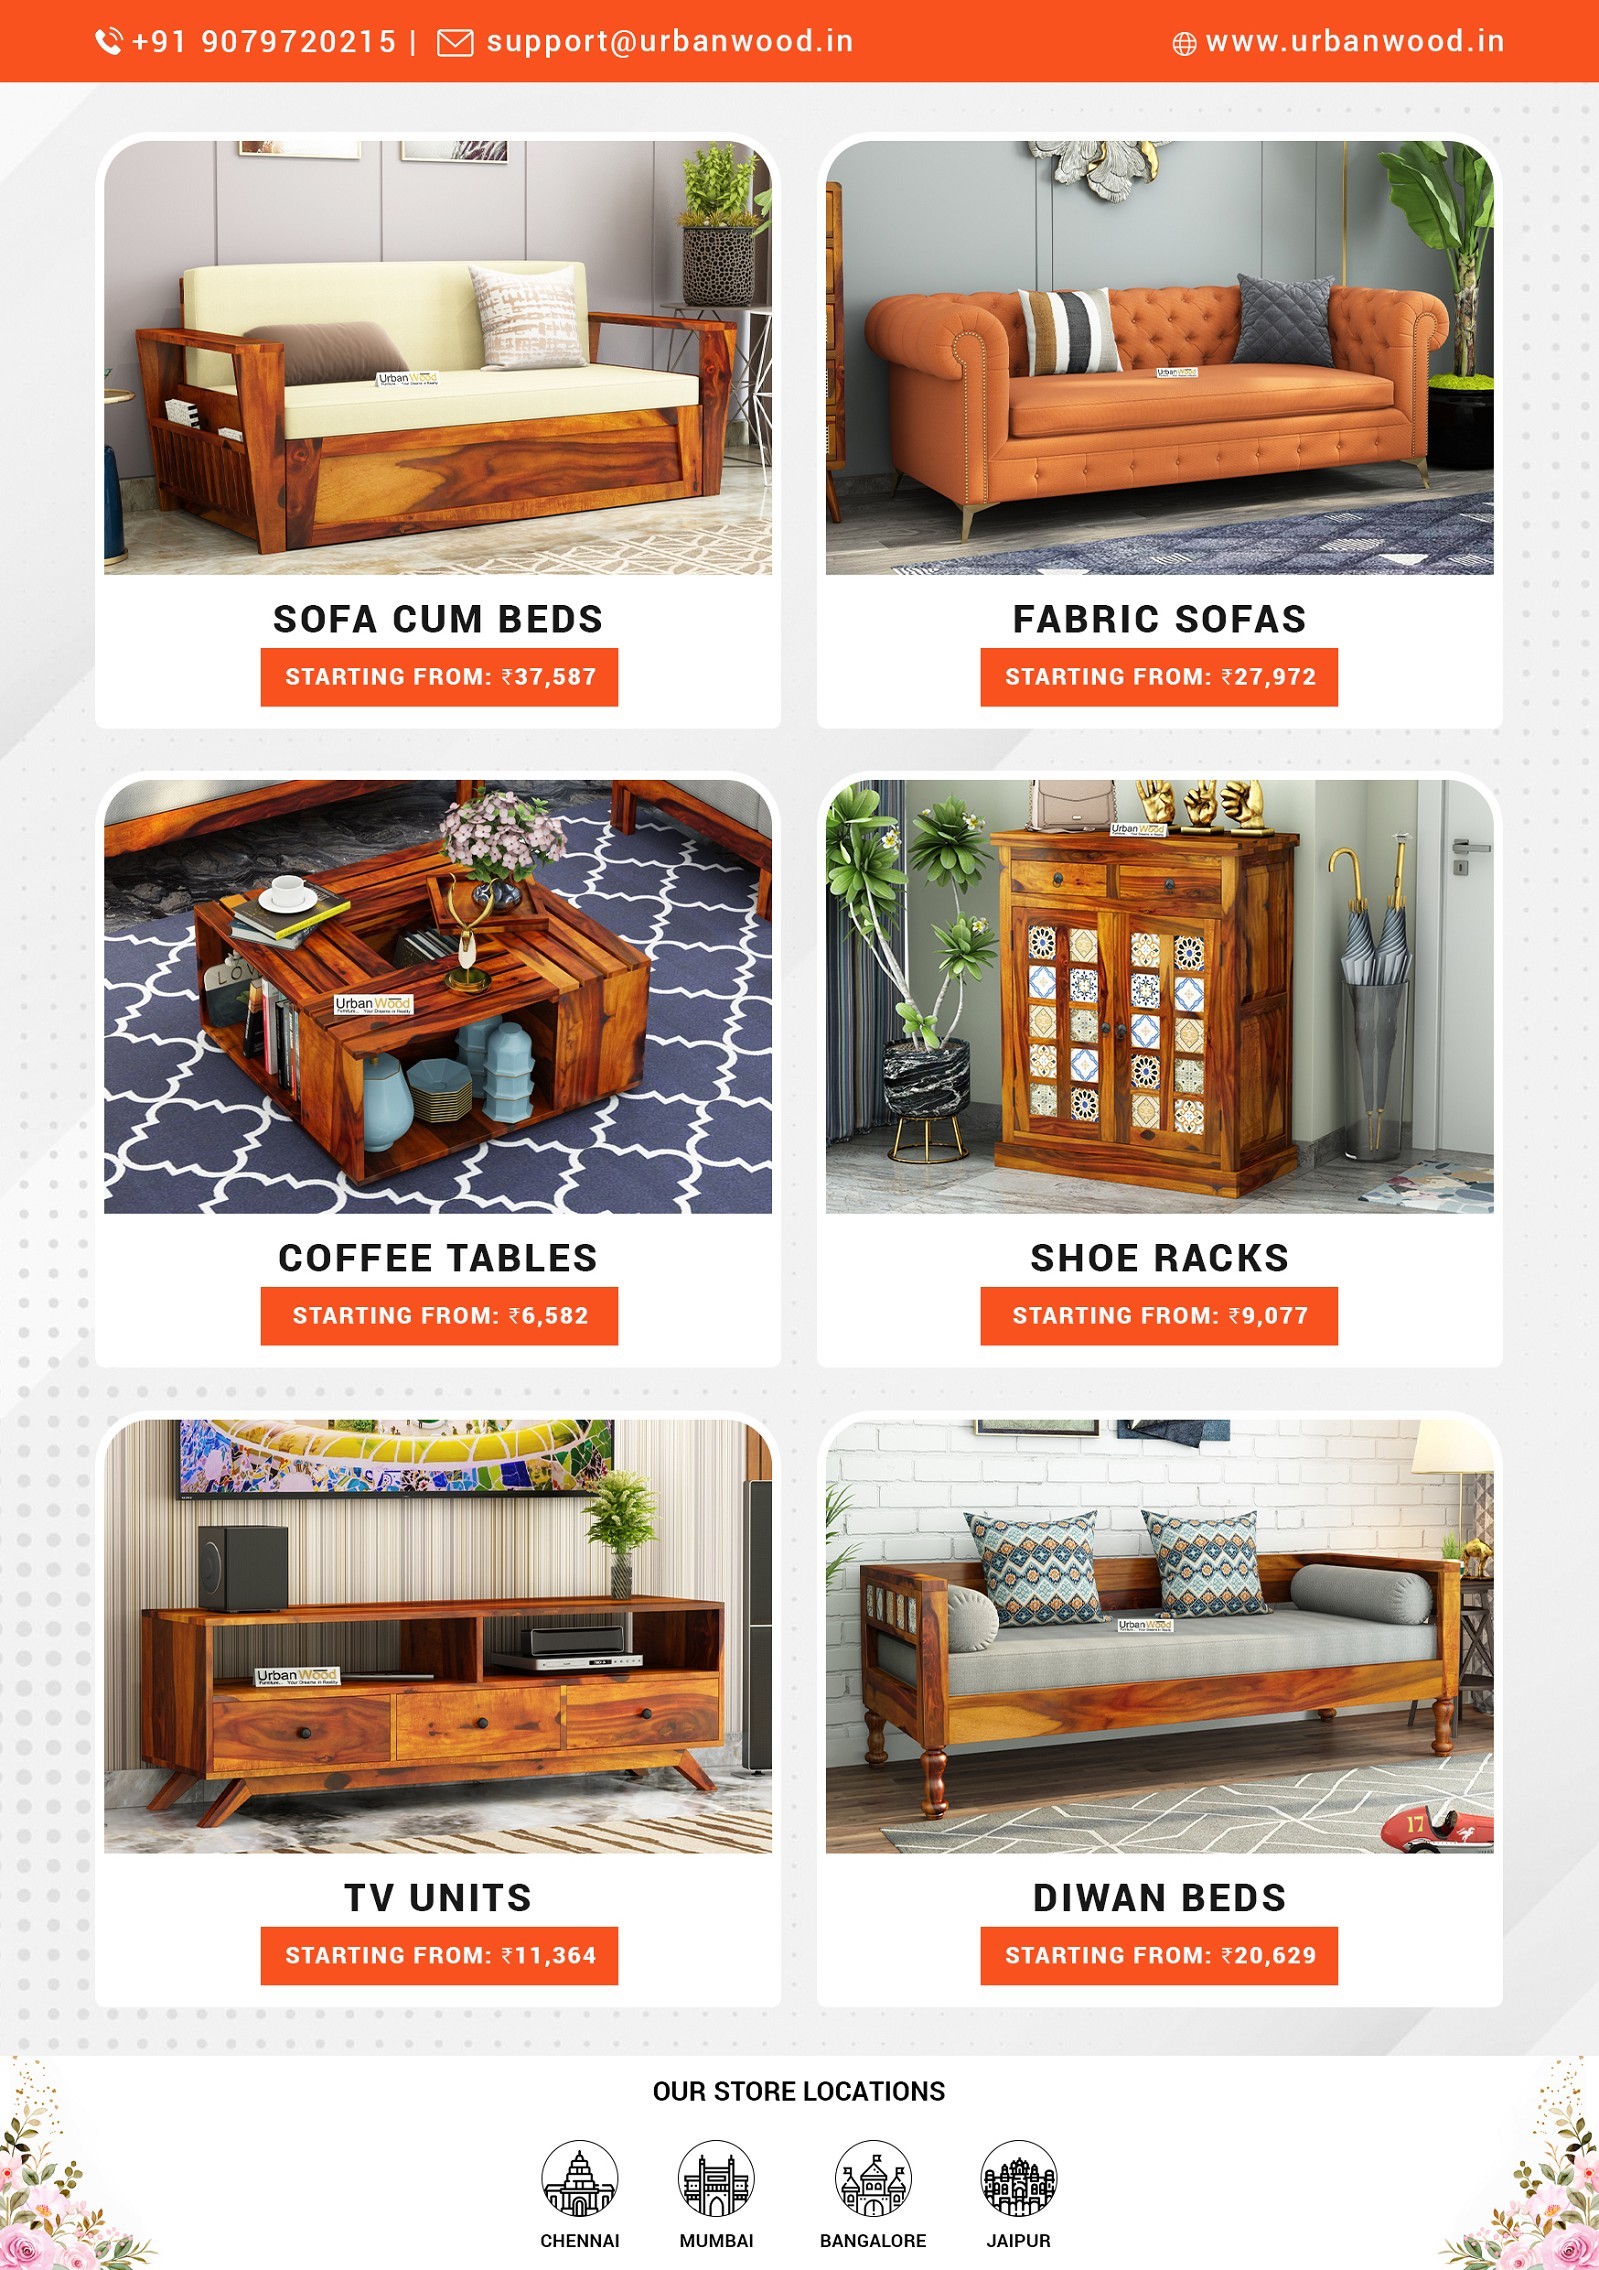 Our furniture store in Bangalore gives you a wider collection of home & office furniture at up to 55